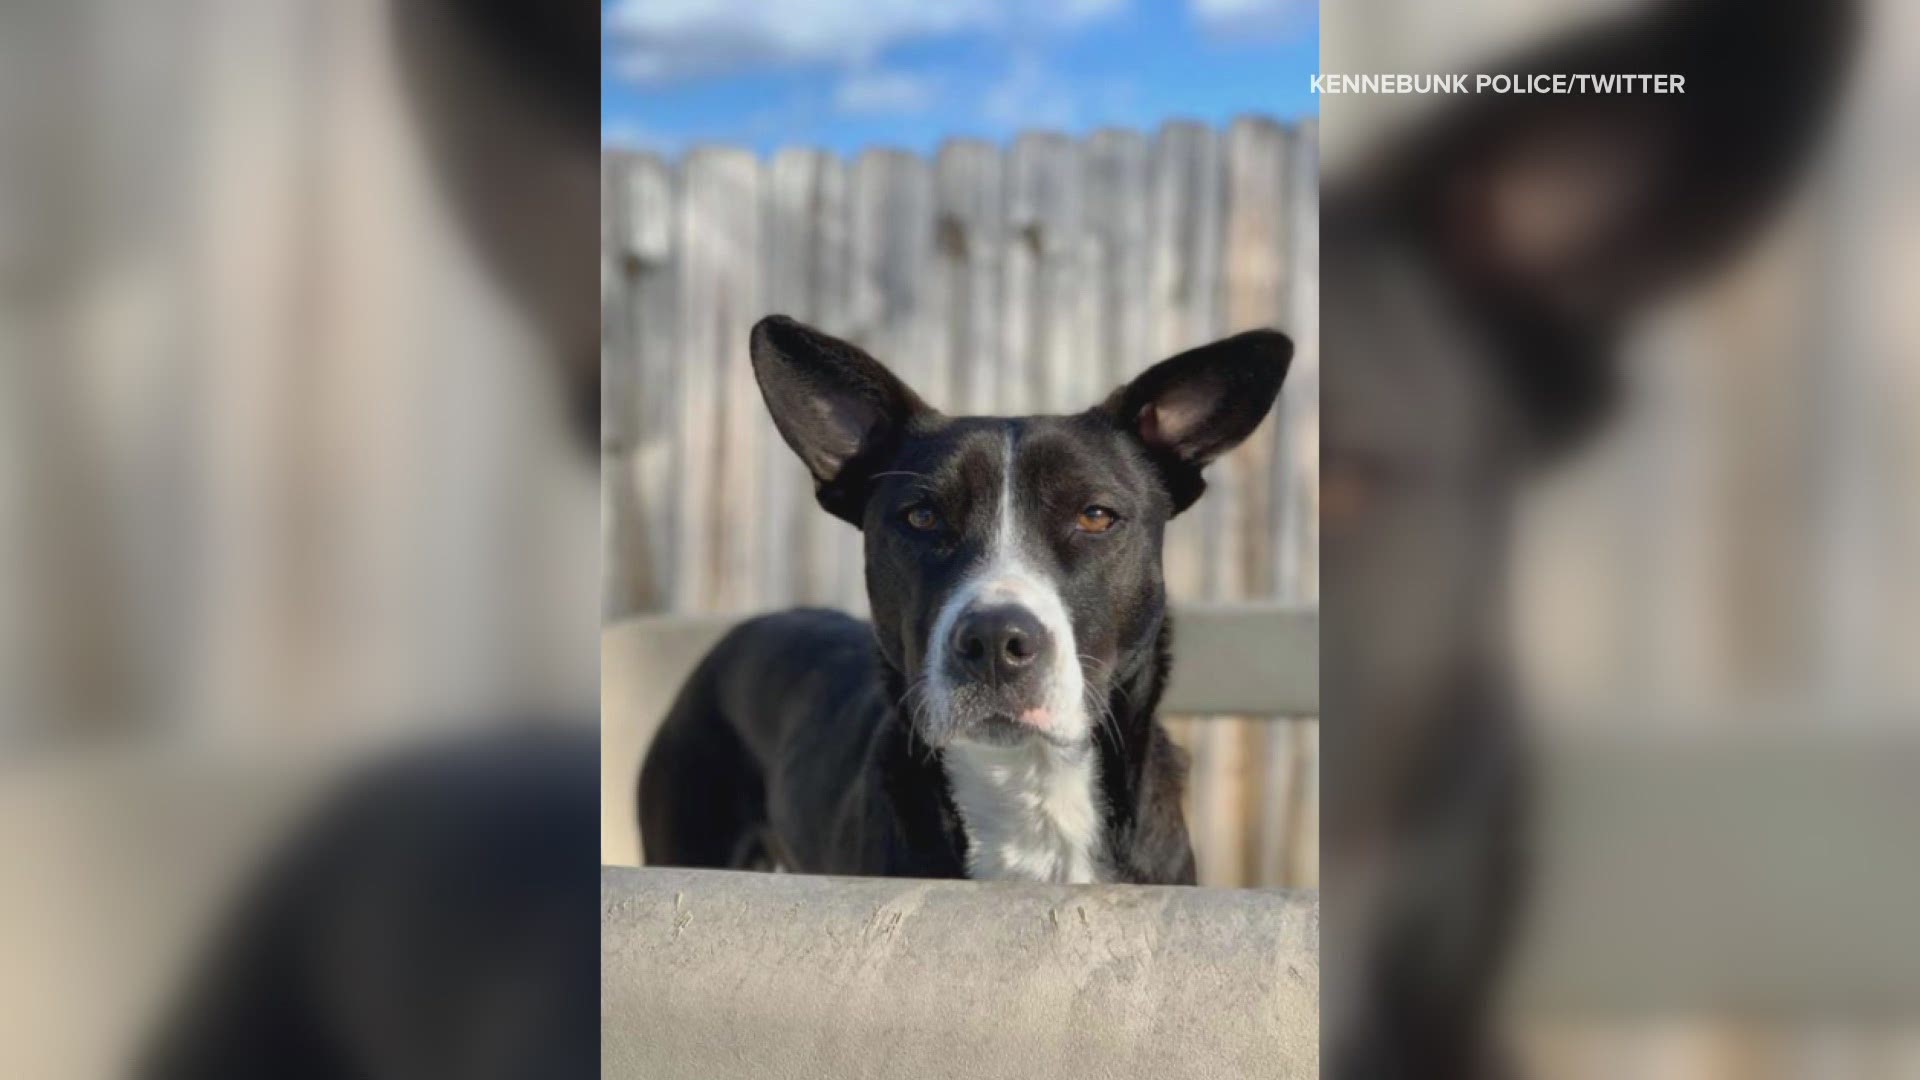 A dog is missing after a car crash that started with a stolen car. Kennebunk police are looking for Pahrah who was last seen running into the woods.